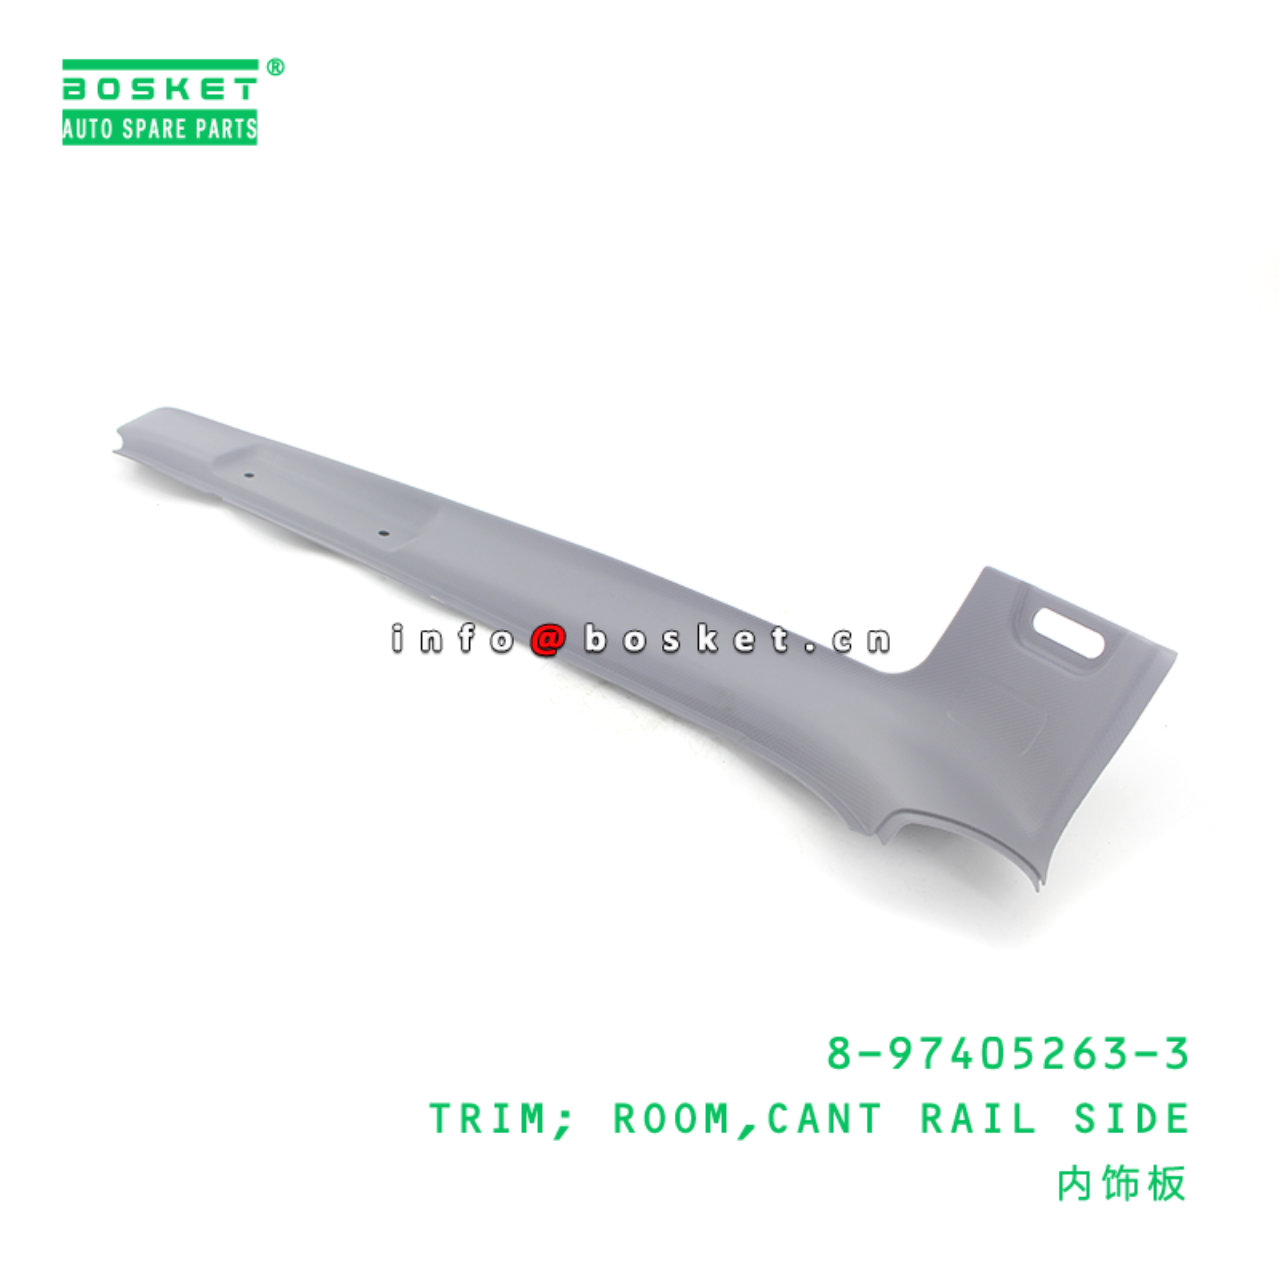 8-97405263-3 Cant Rail Side Room Trim Suitable for ISUZU NMR 8974052633